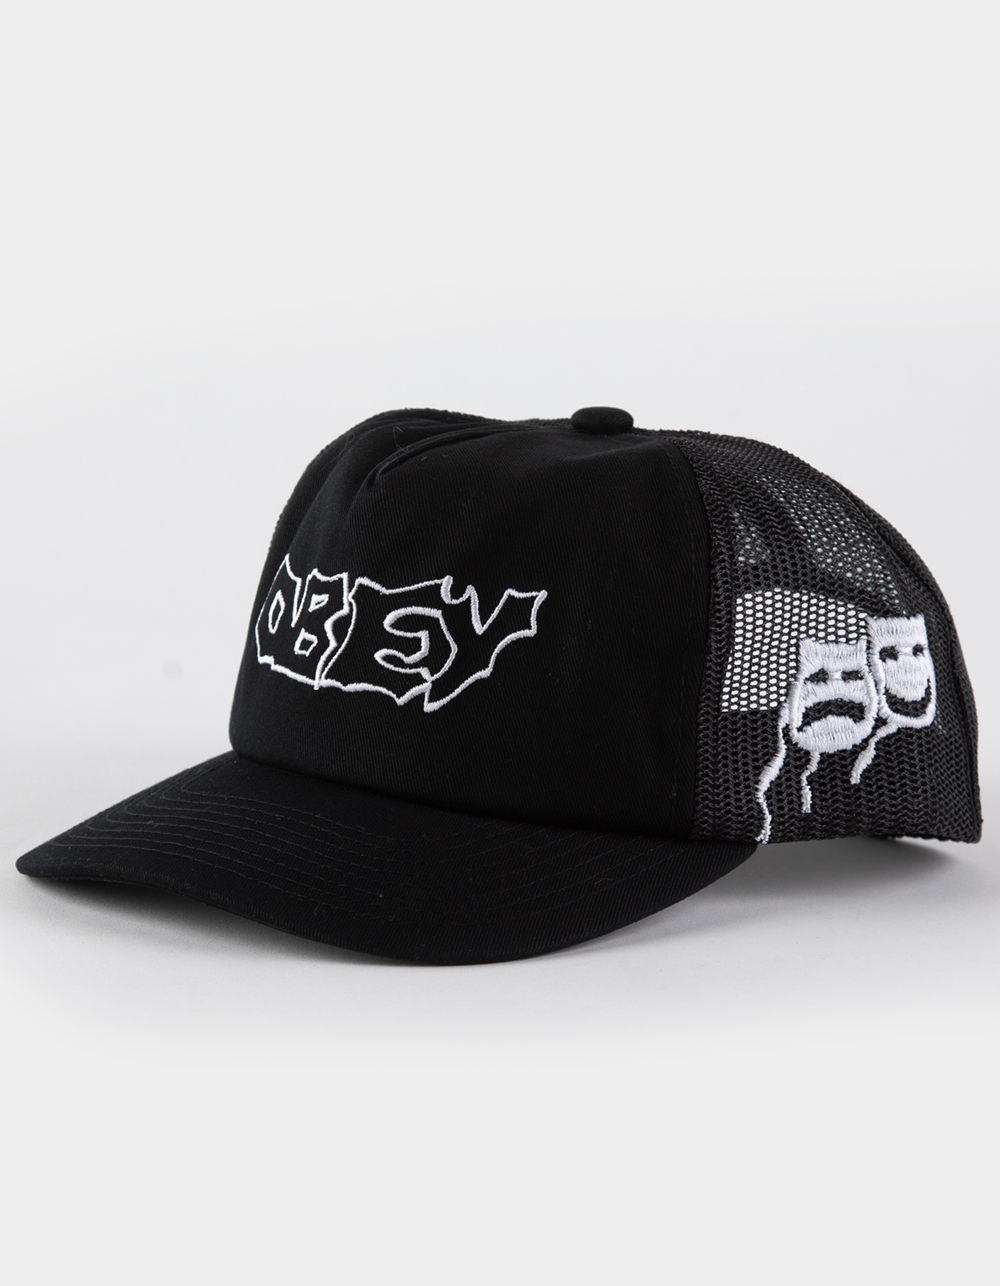 OBEY Disobey Mens Trucker Hat